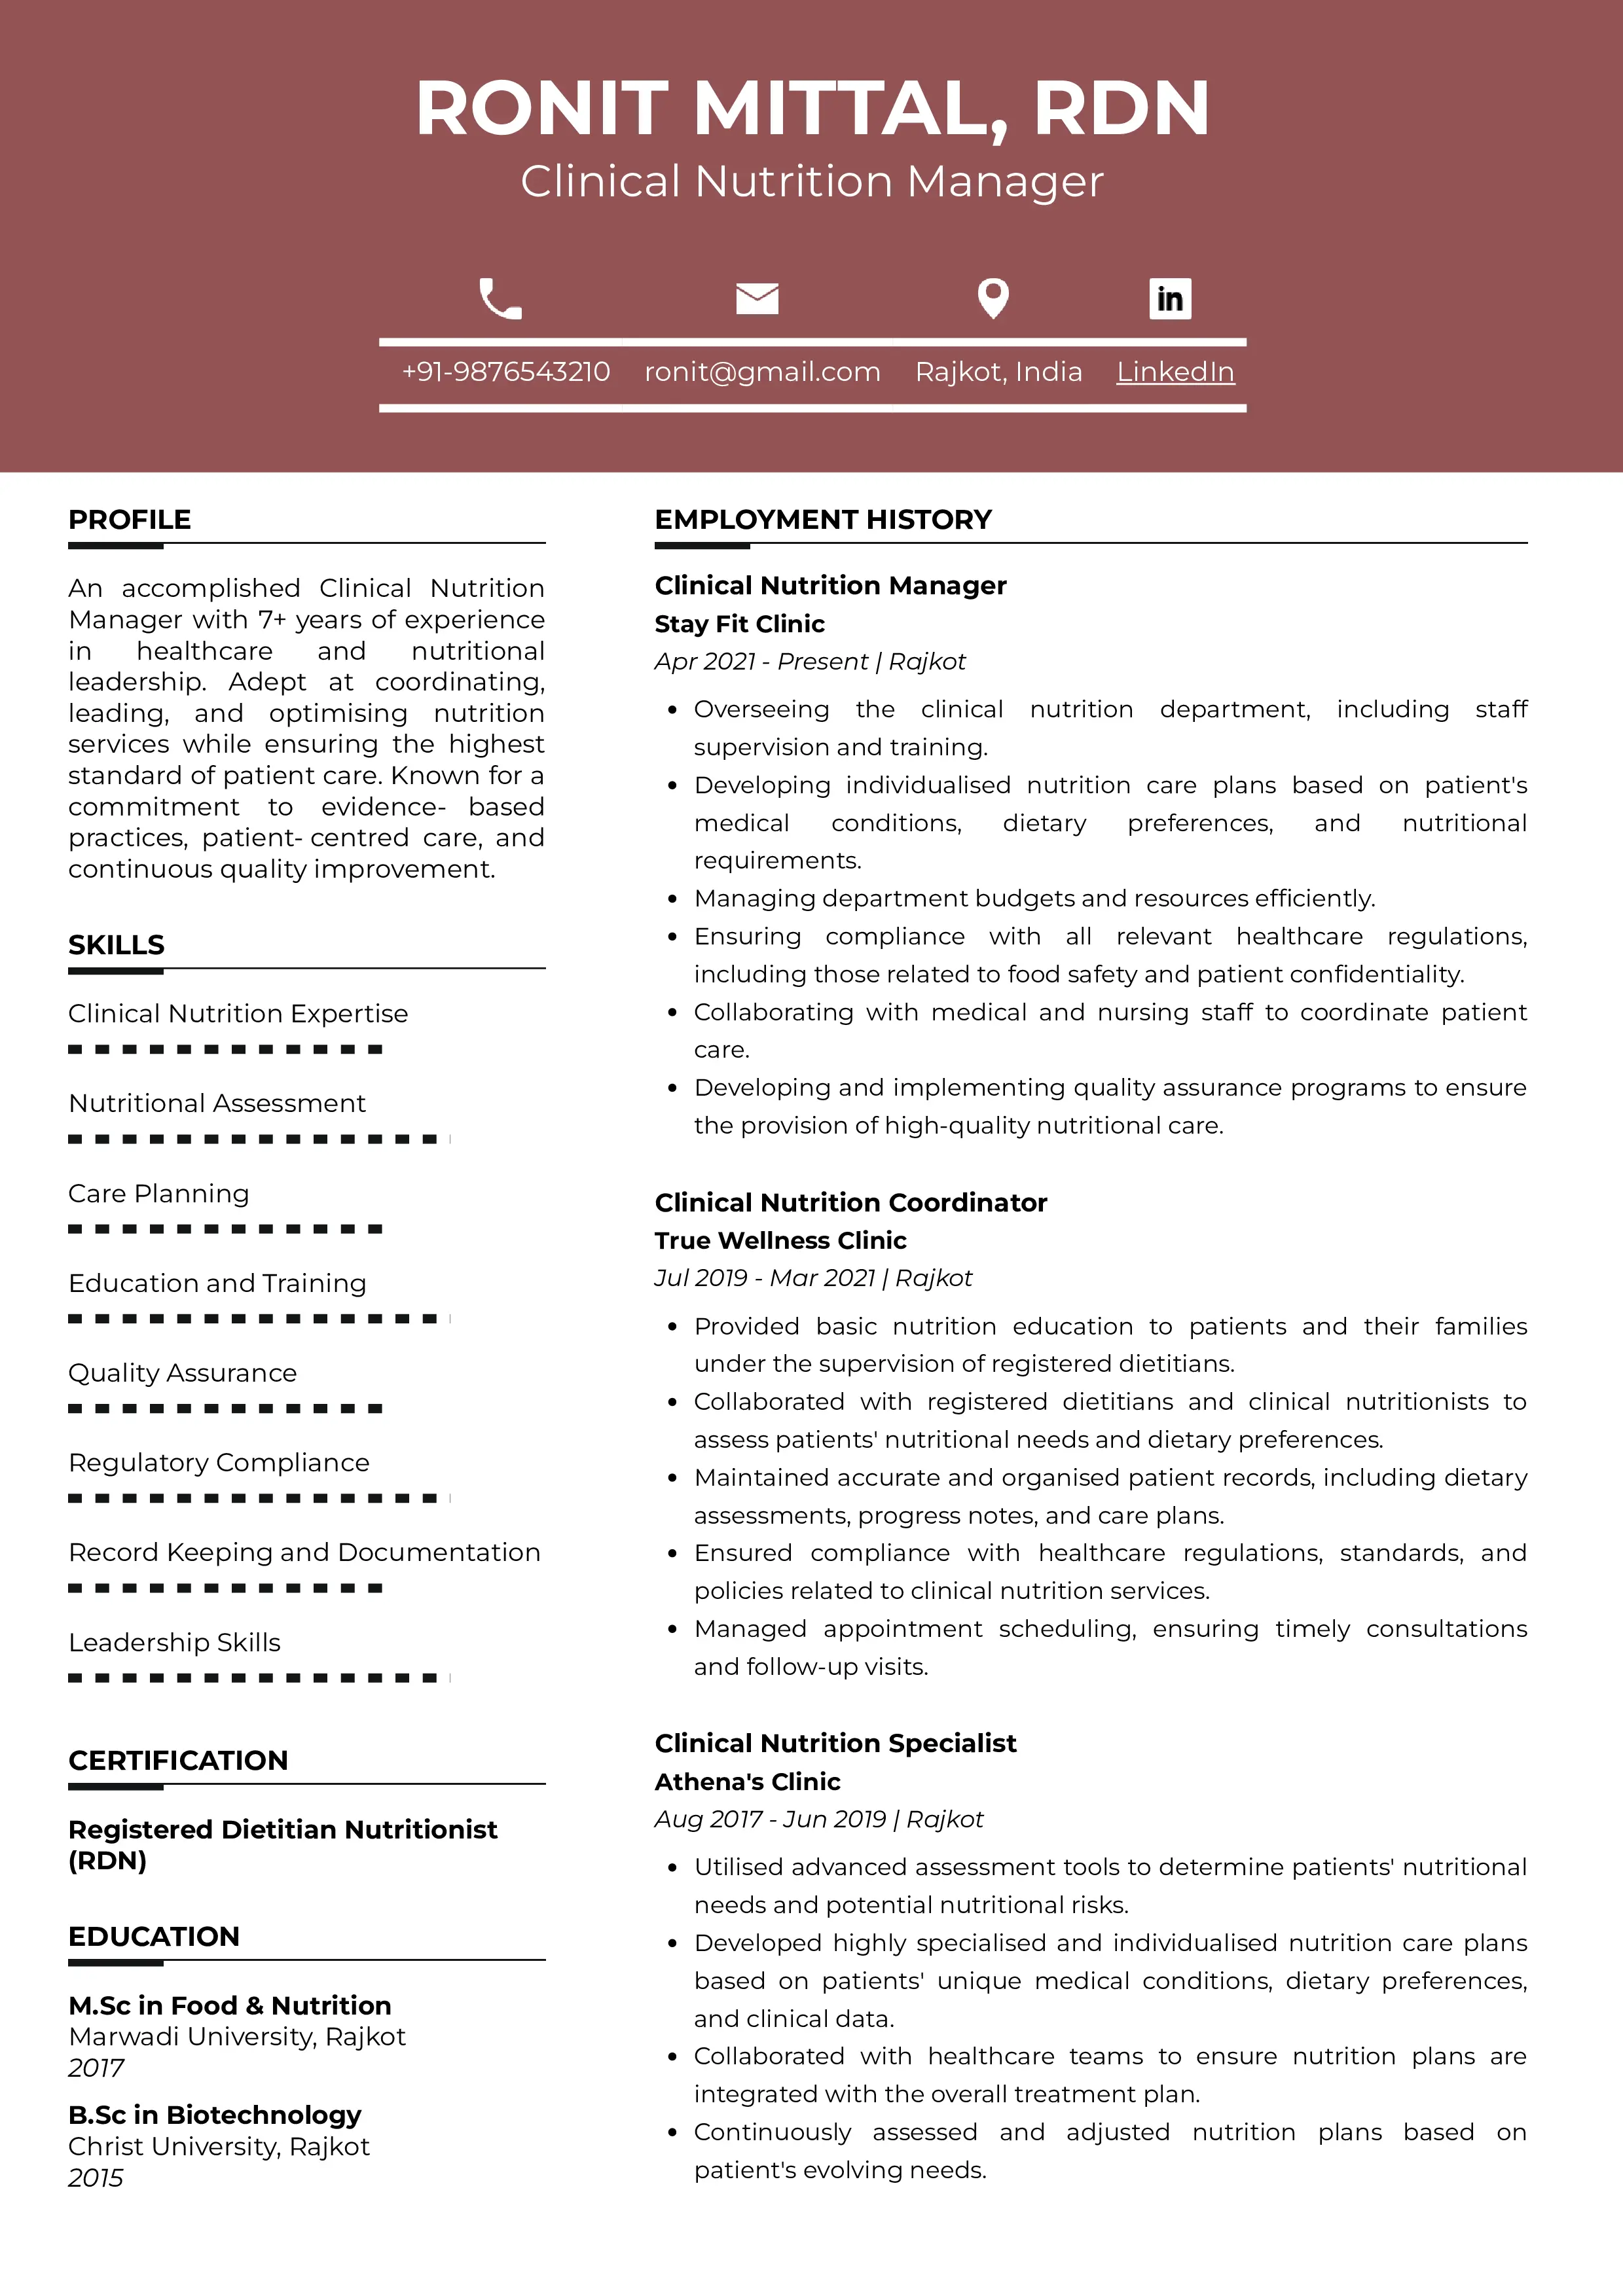 Sample Resume of Director of Clinical Nutrition Manager | Free Resume Templates & Samples on Resumod.co